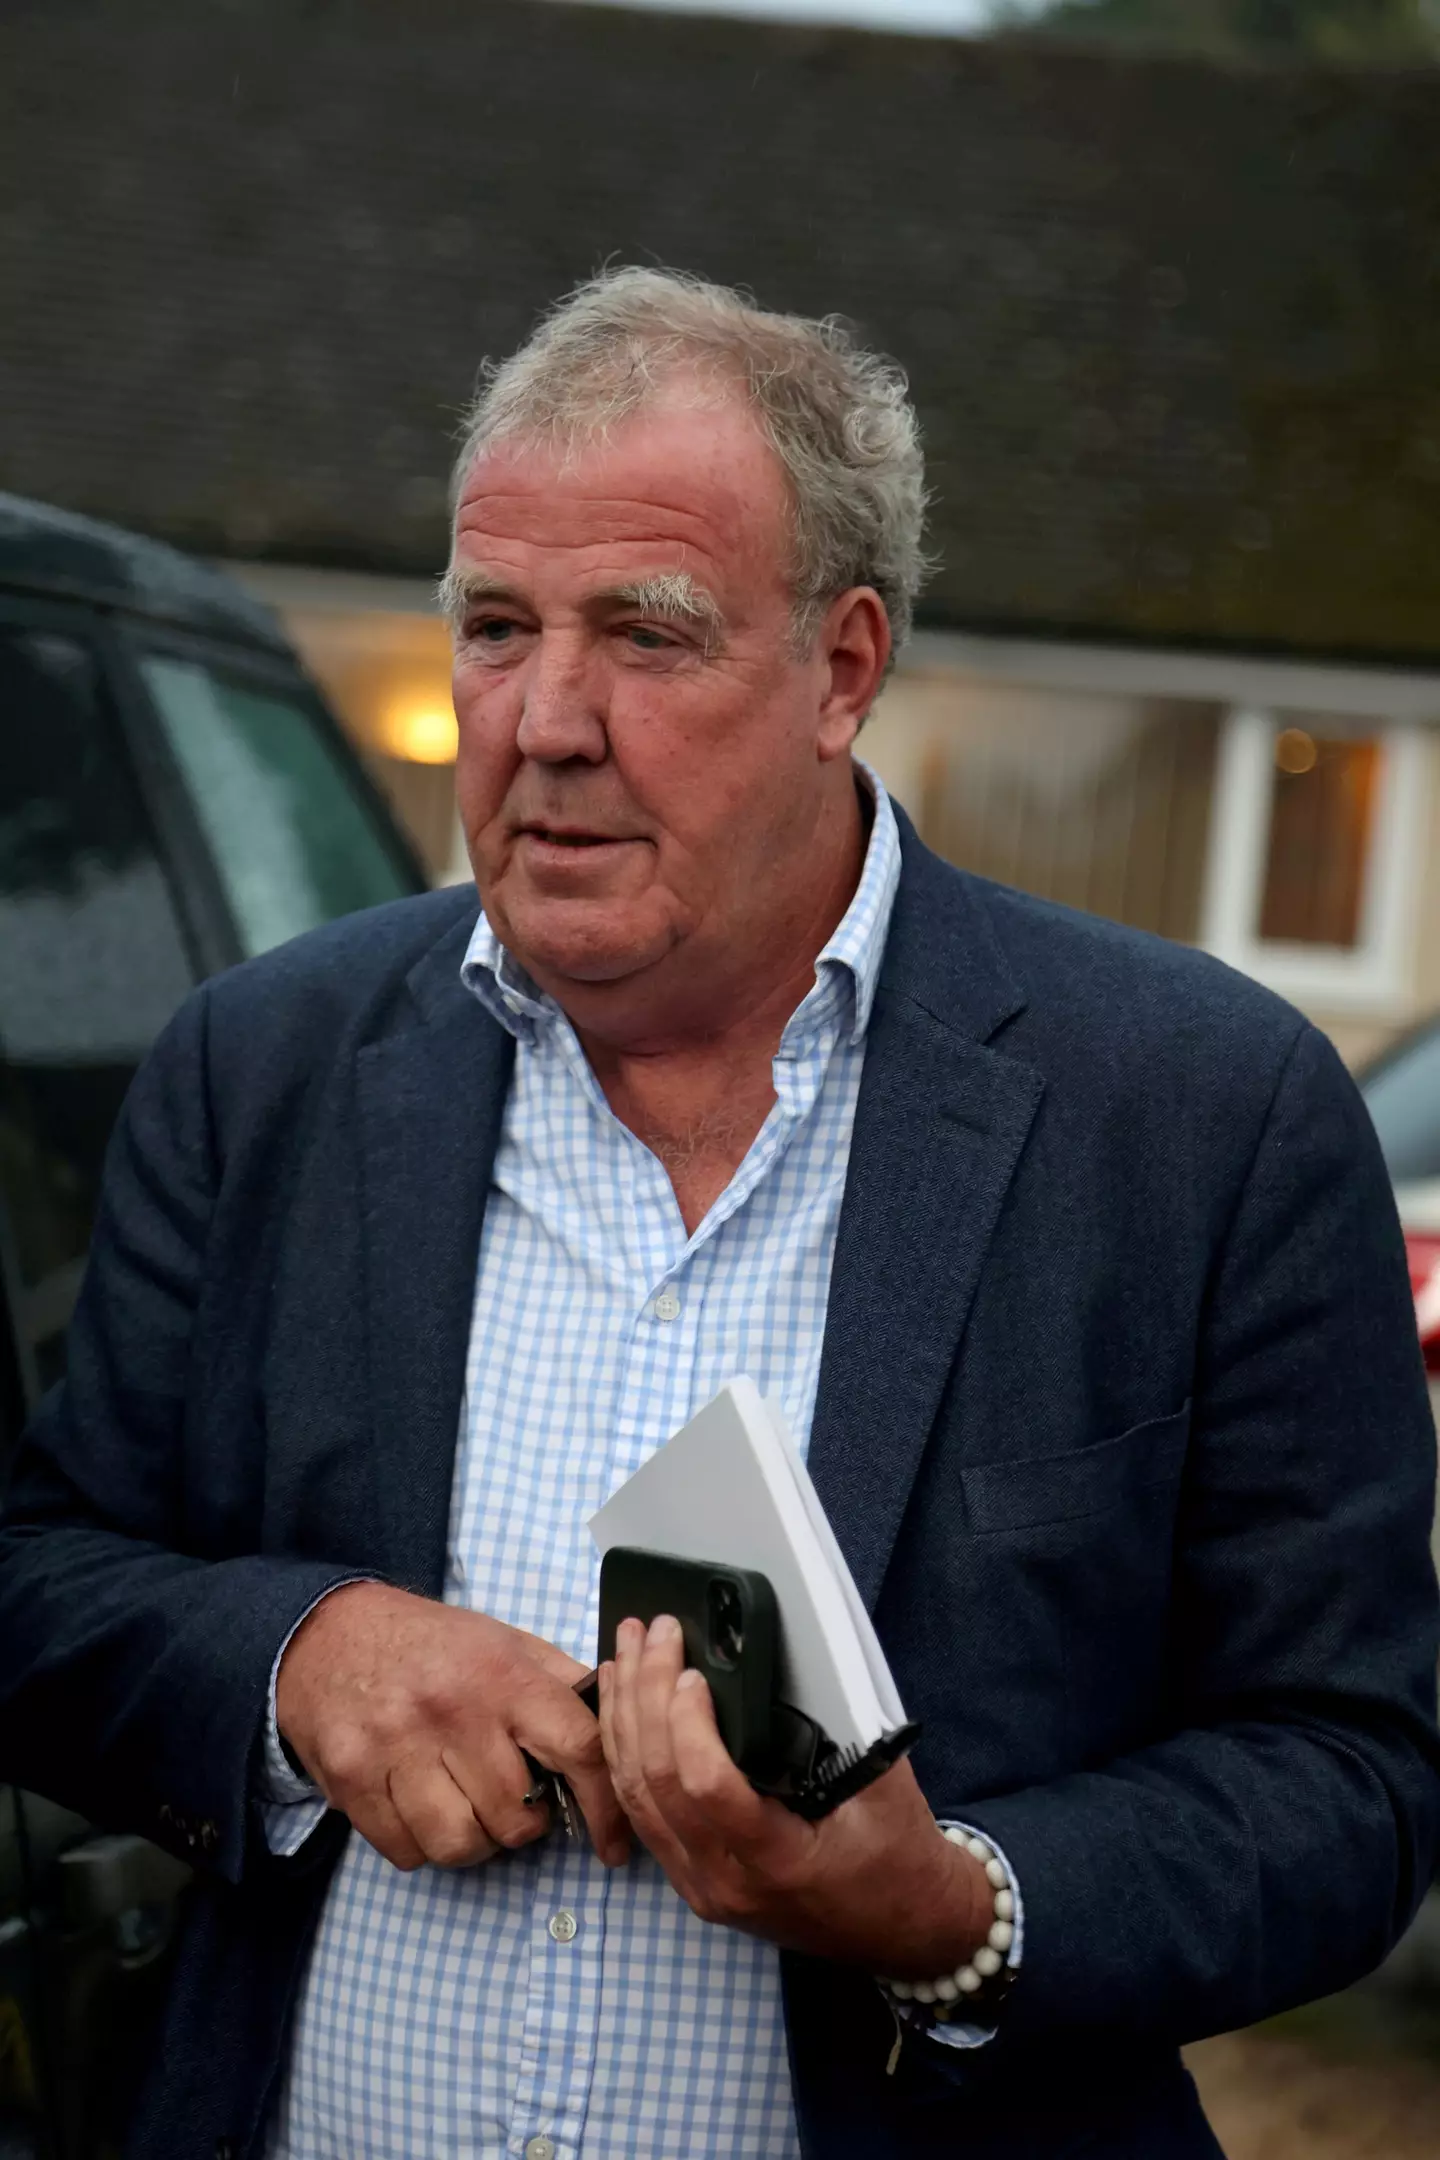 Jeremy Clarkson did not attend the appeal hearing last week, but said a compromise would be reached.